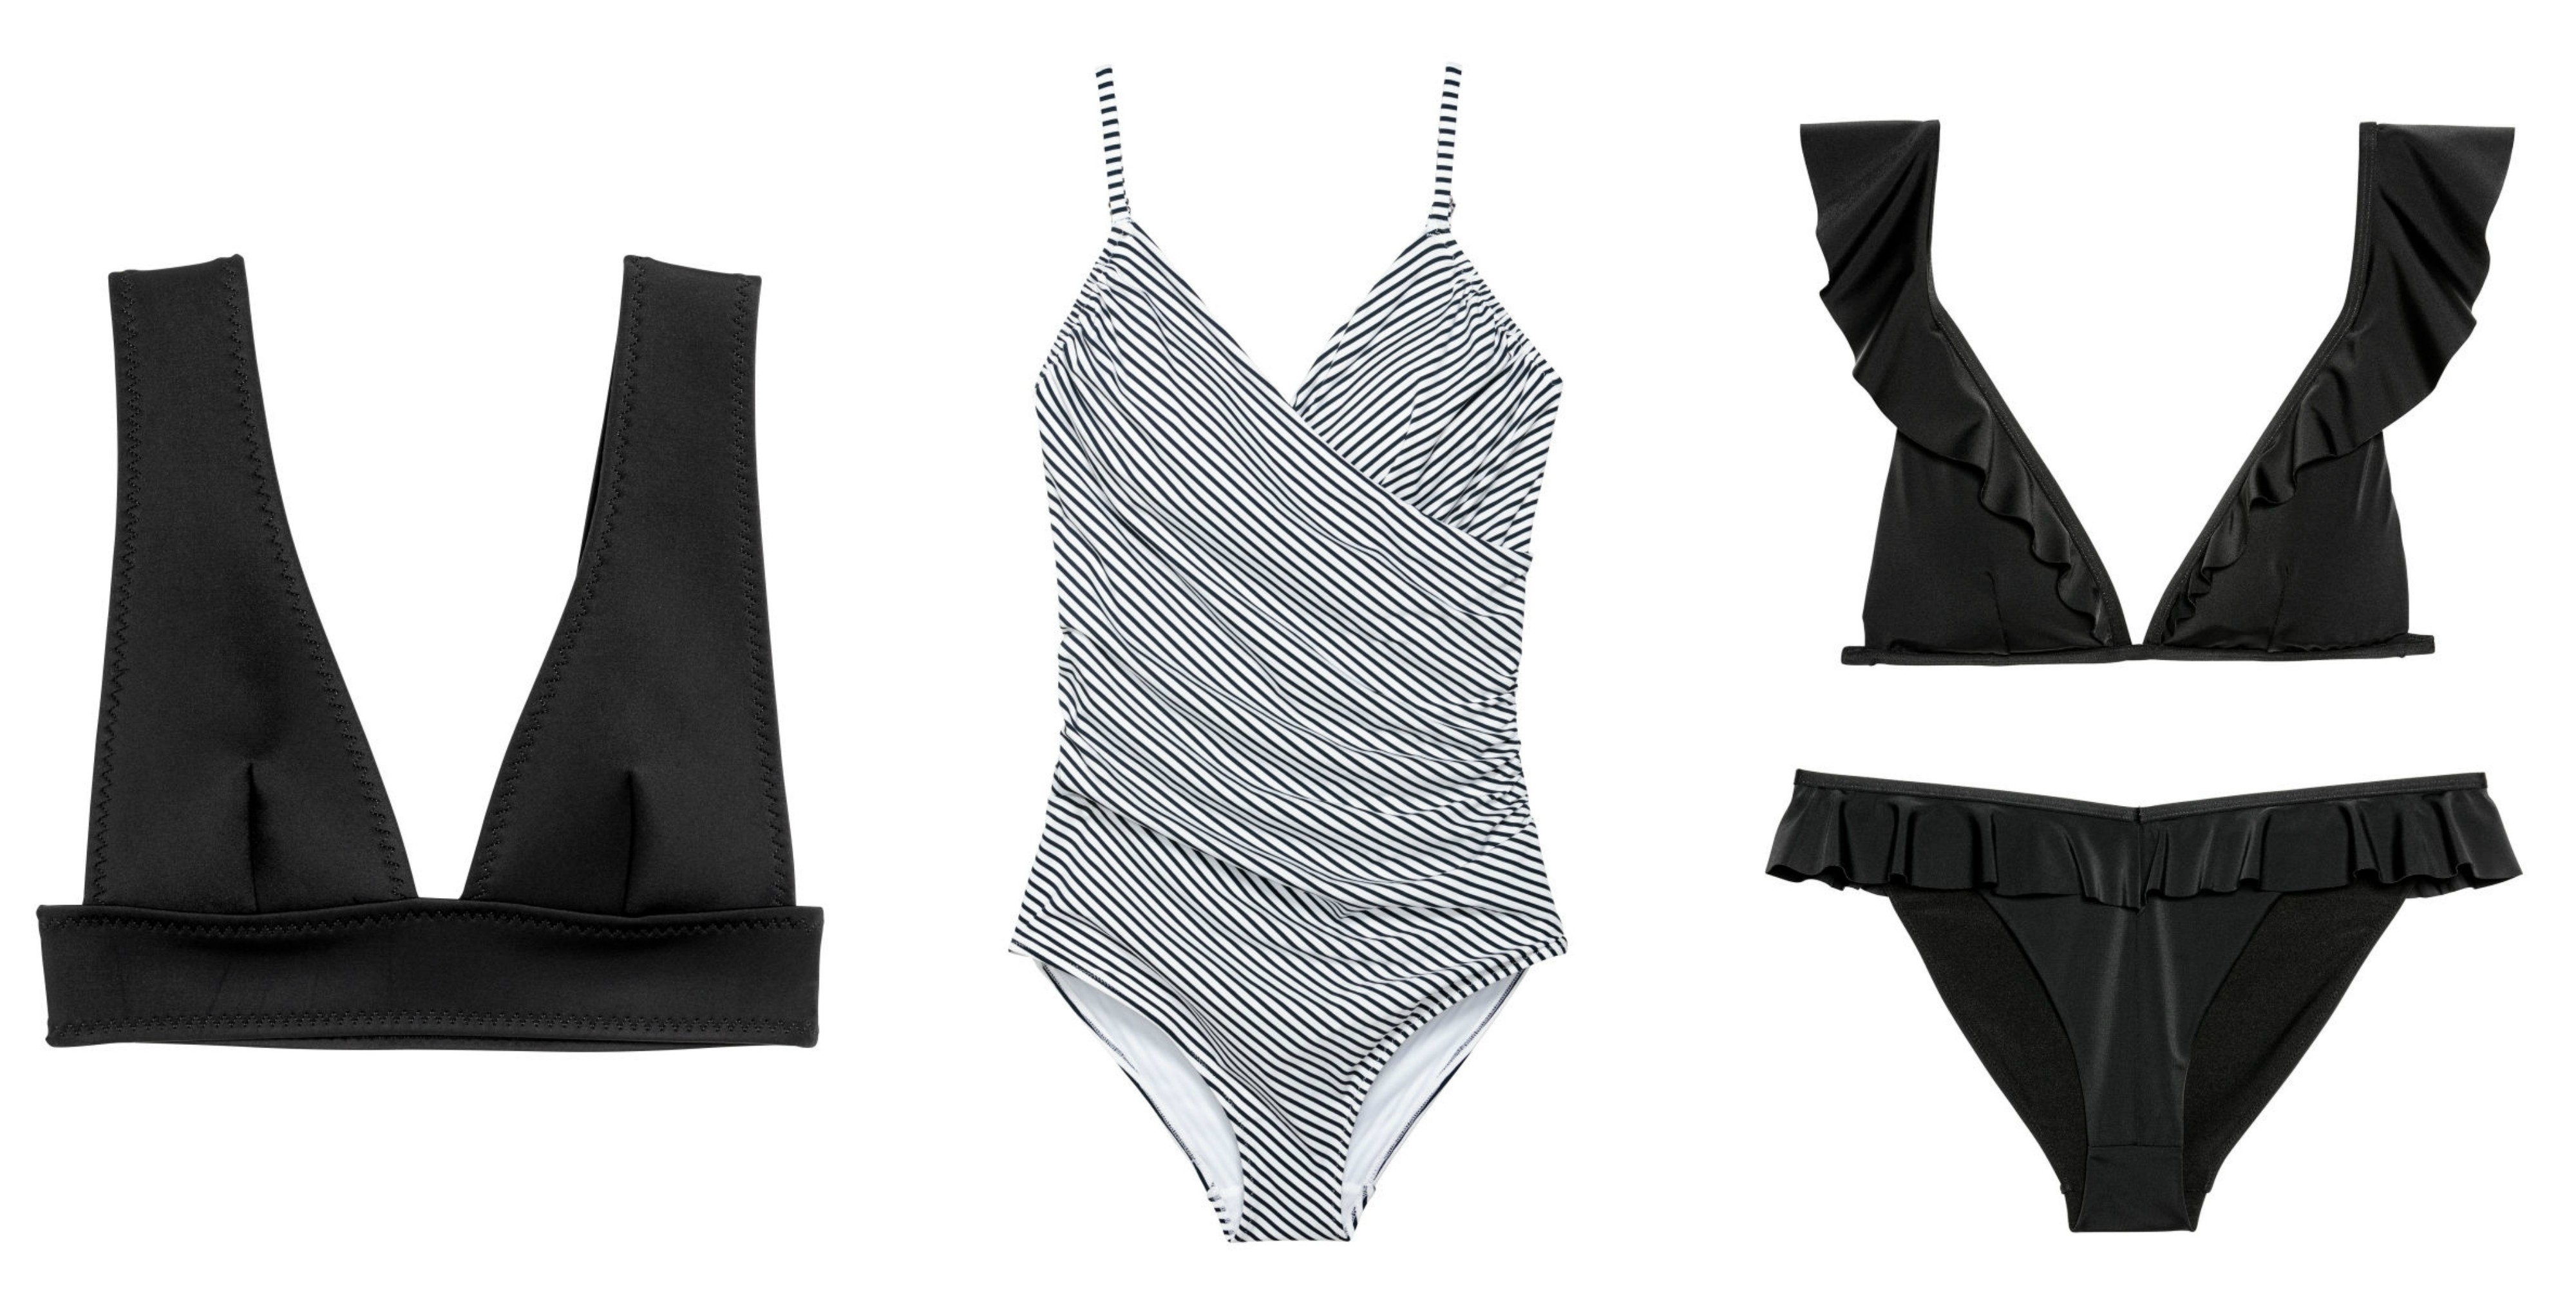 H&M - The Best Places To Buy Swimsuits - Summer Swimwear - Best Swimwear - Best Swimwear To Buy Online - Flattering Swimsuits Guide - Communikait by Kait Hanson